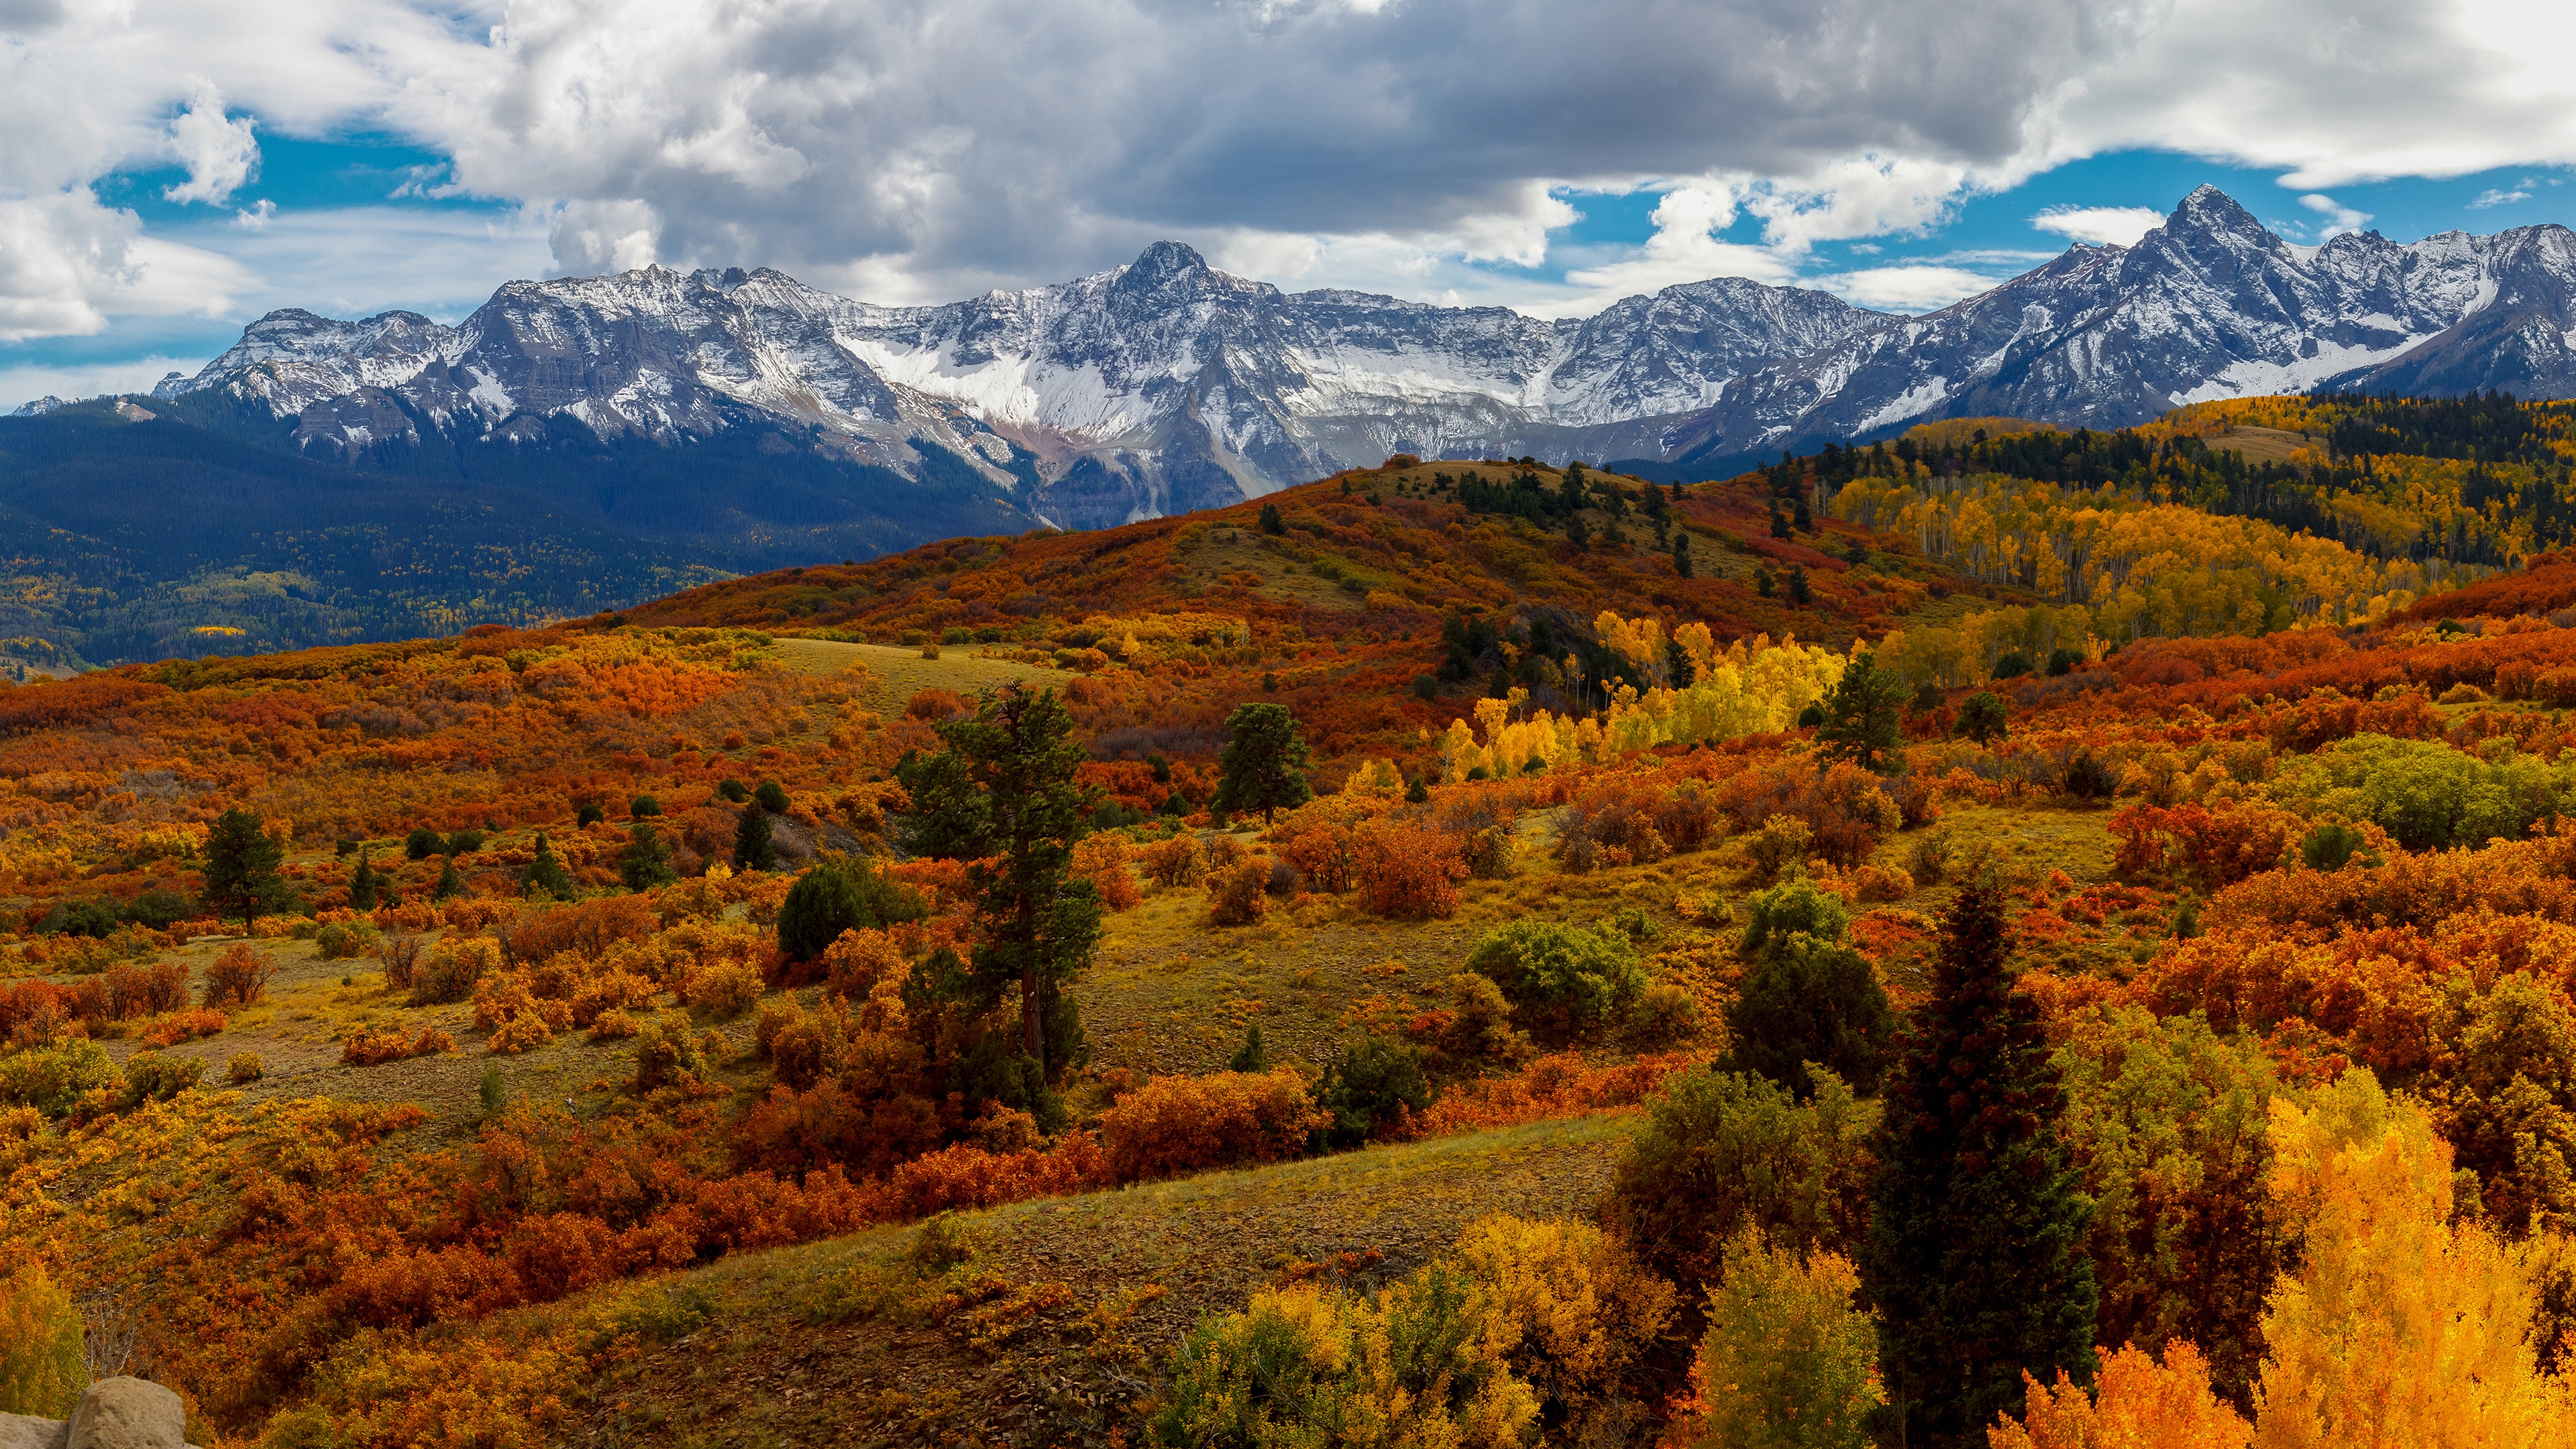 General 3840x2160 fall landscape nature mountains